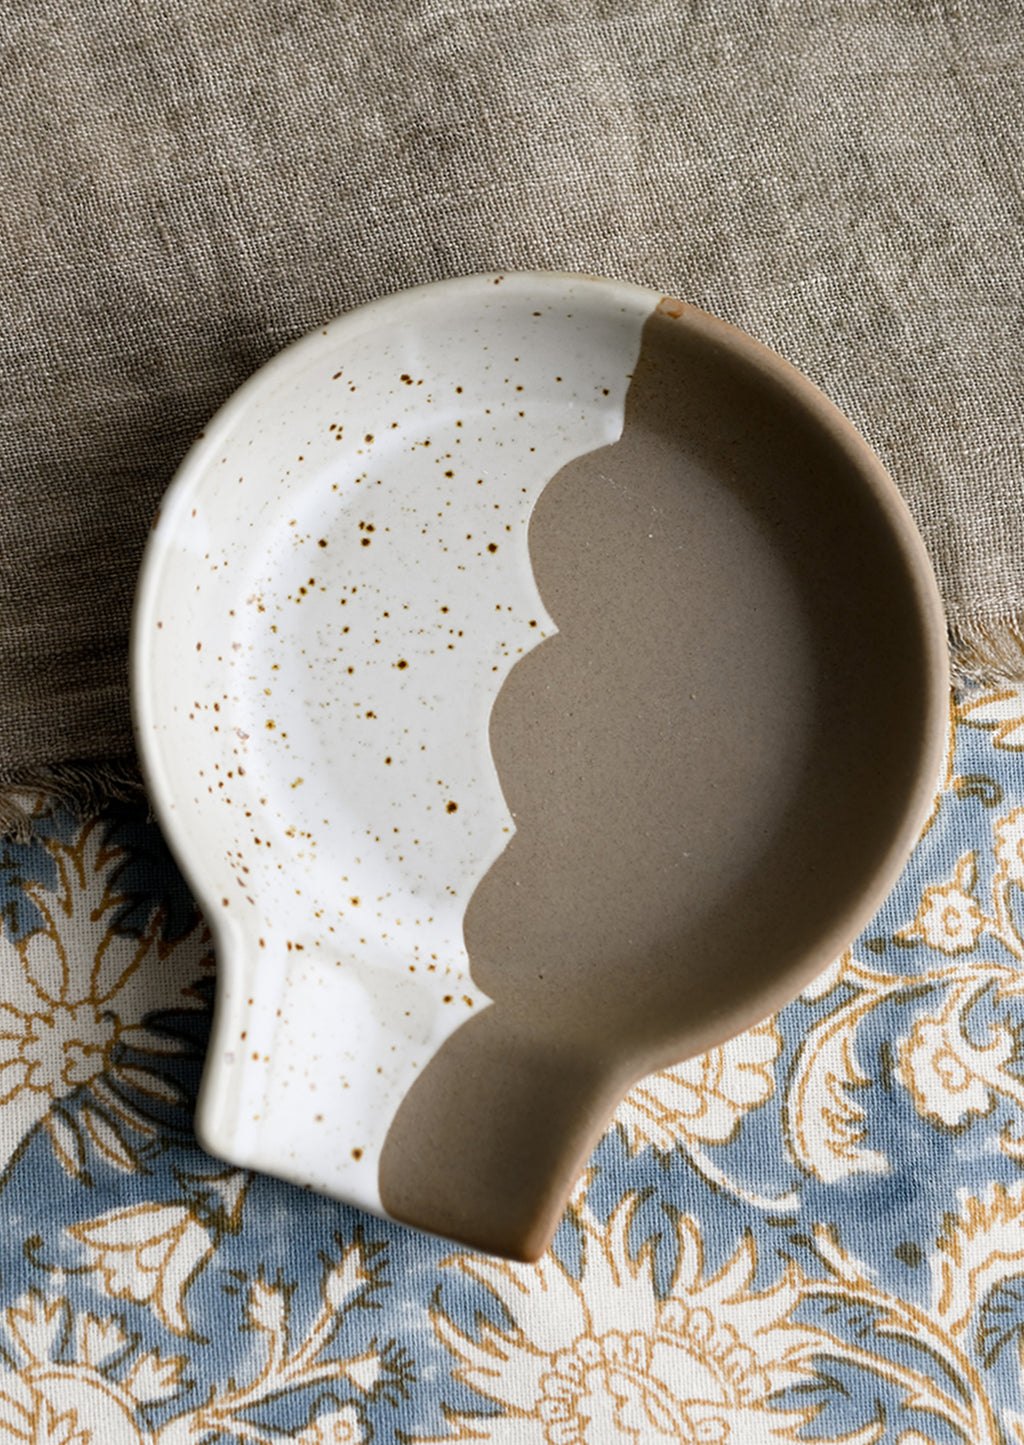 1: A ceramic spoon rest with scalloped edge dividing brown and speckled white halves.